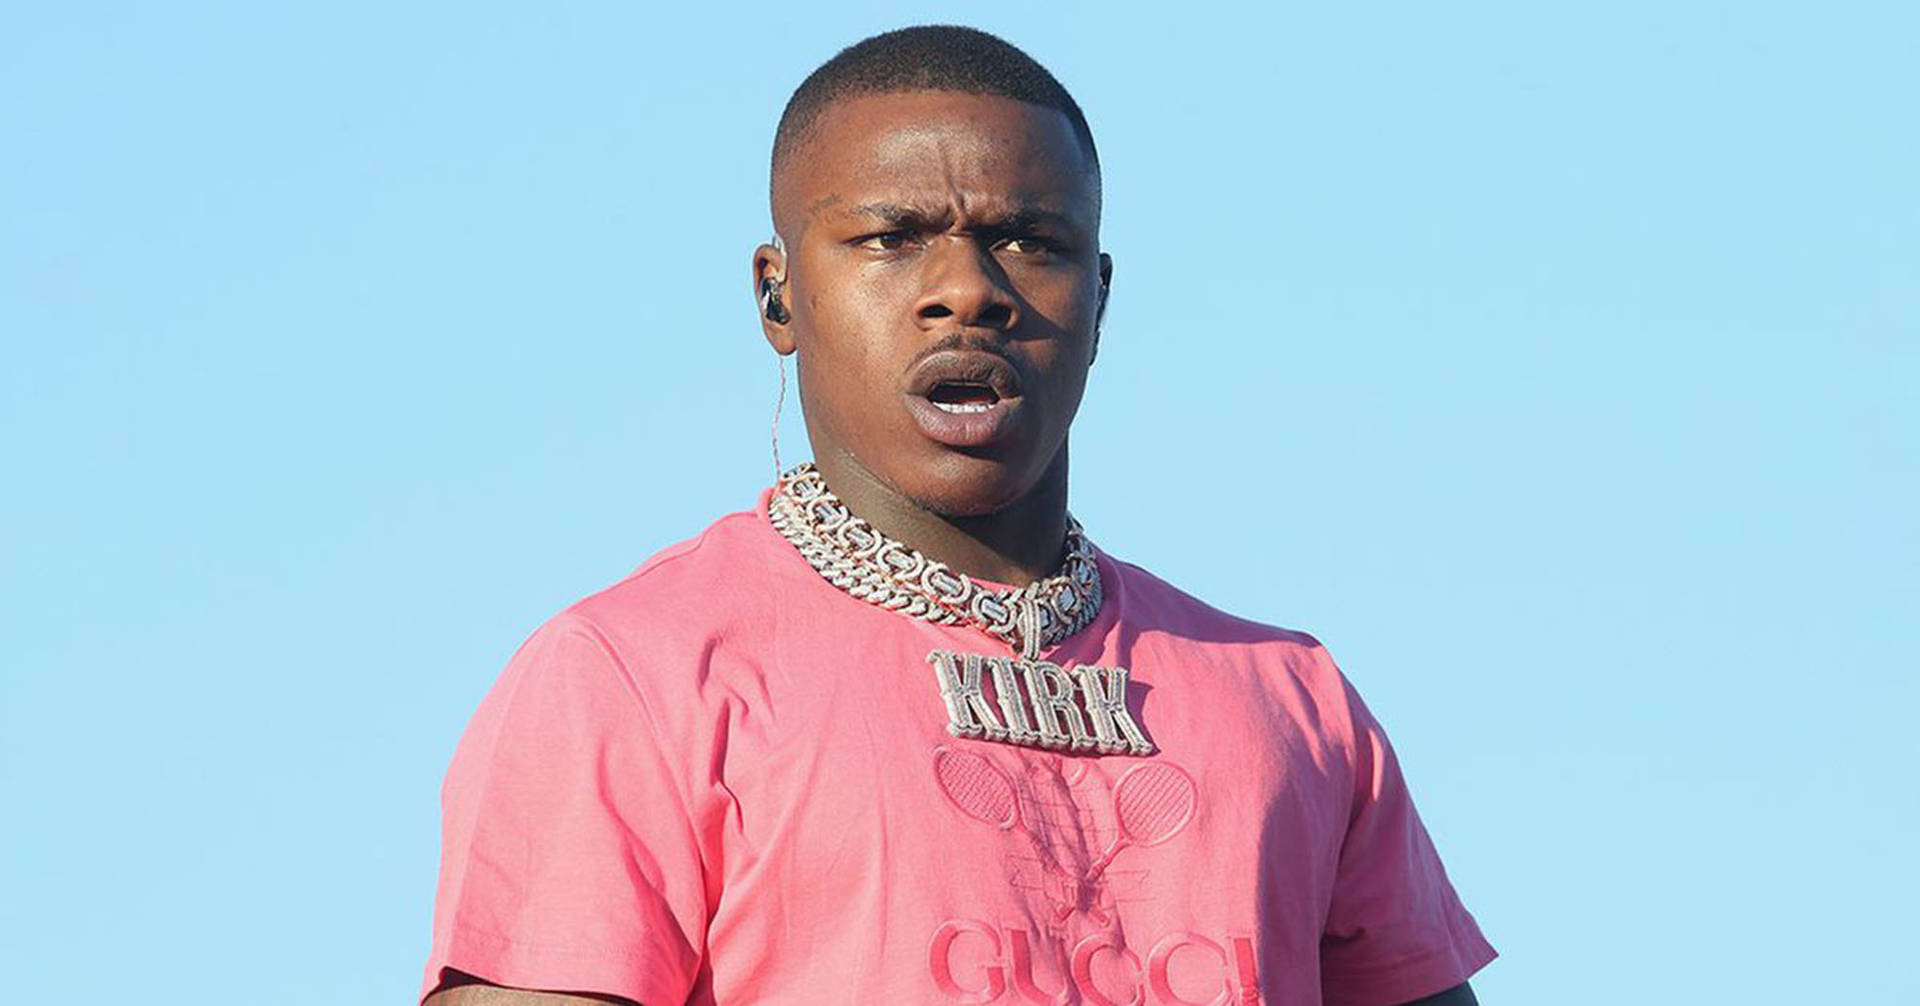 Dababy In Pink Shirt Performance Outfit Wallpaper